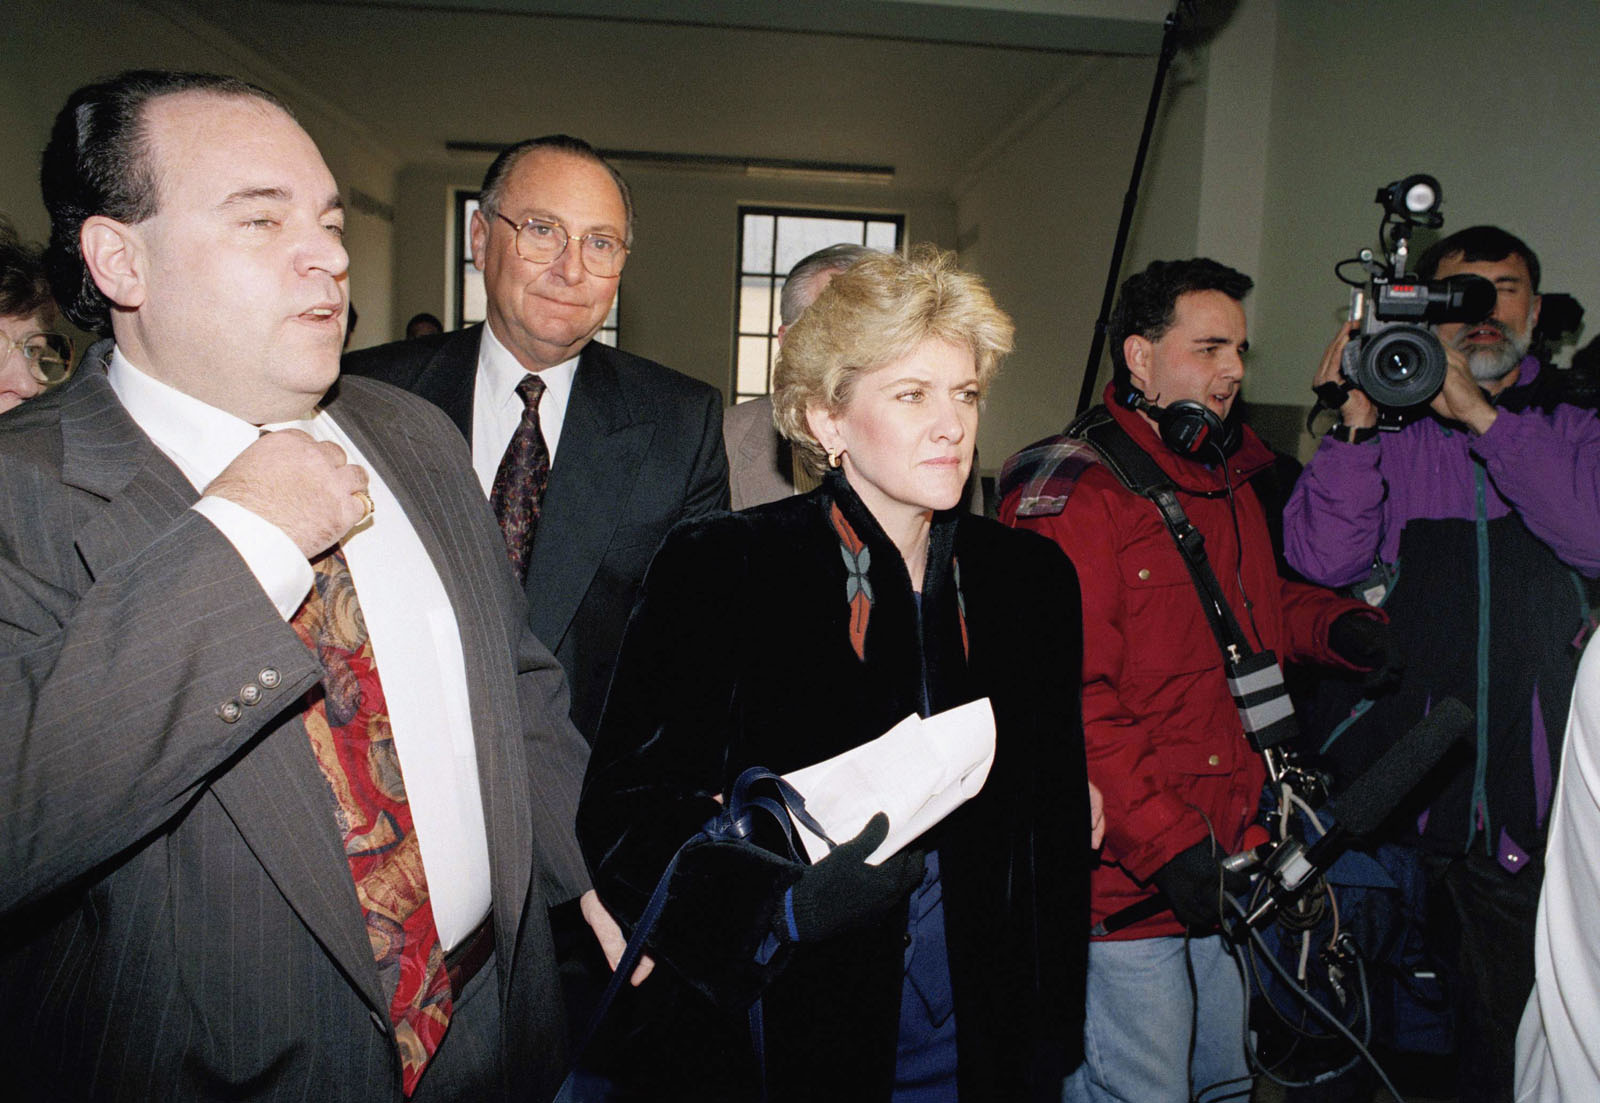 Mary Joe Buttafuoco arrives carrying her notes on December 1, 1992 at court in Mineola, New York, followed by her attorney Michael Rindenow, left, for the sentencing of Amy Fisher, the Long Island teen who tried to kill her. This is the first time since the May shooting that Buttafuoco has become face-to-face with her assailant, Fisher was sentenced to a five-to-15-year term in the "Teen Attraction" love triangle shooting. (AP Photo/Richard Drew)